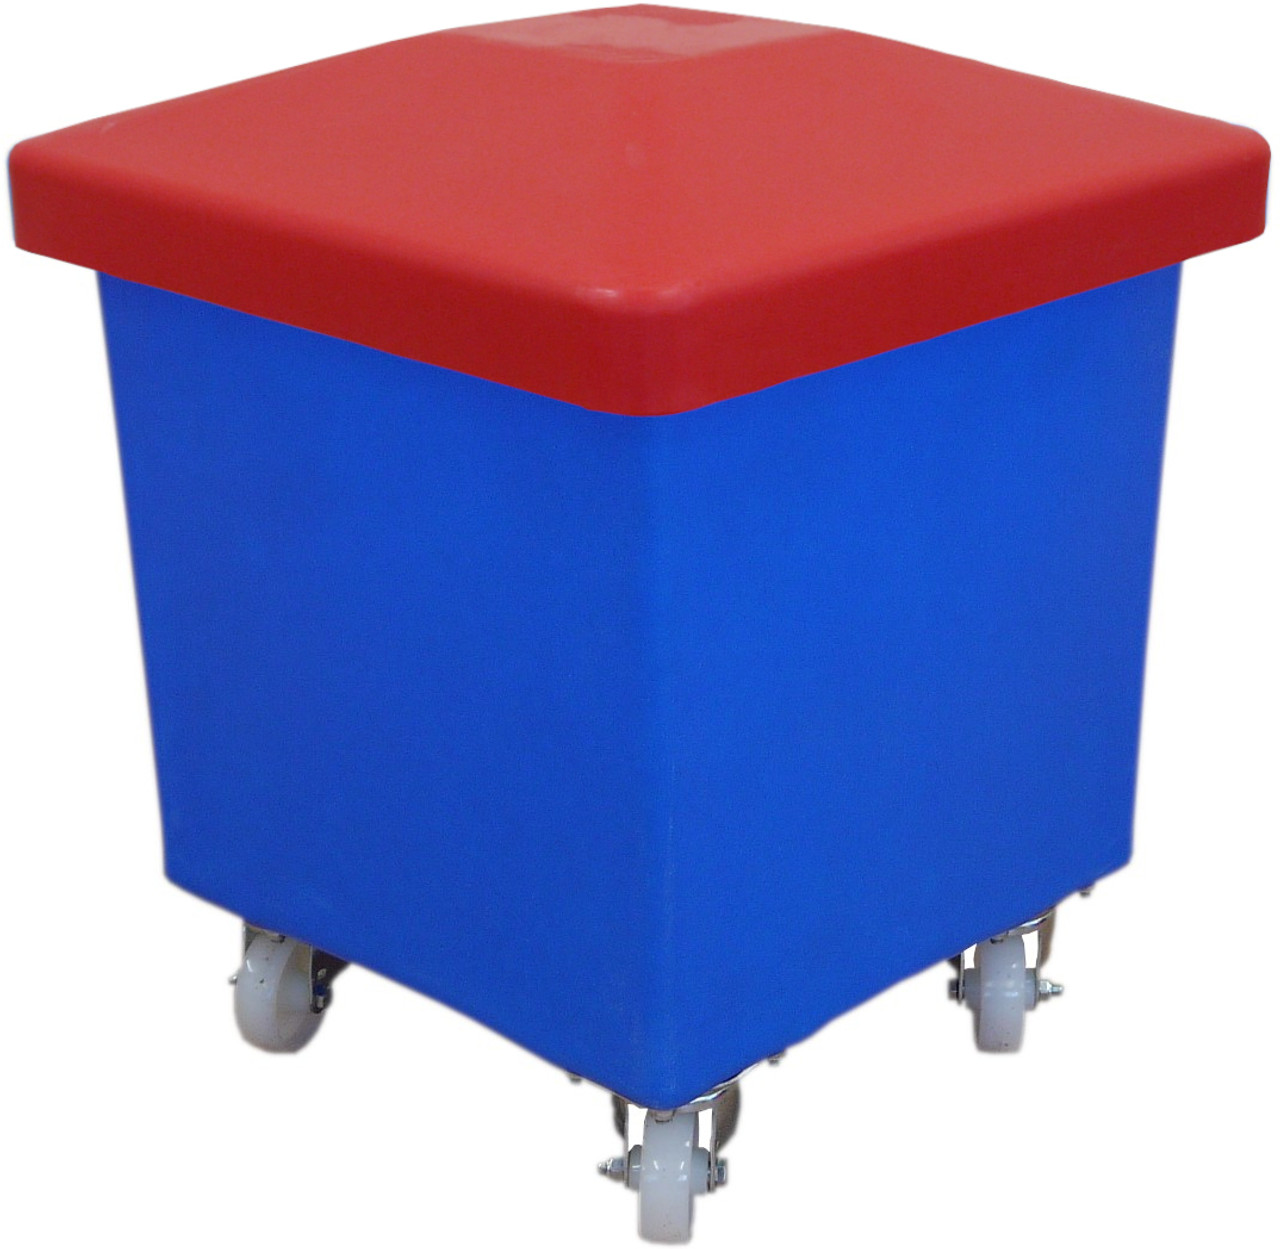 RB0003B - A tapered square polyethylene cube truck that is blue in colour, features four swivel casters and is fitted with optional red lid